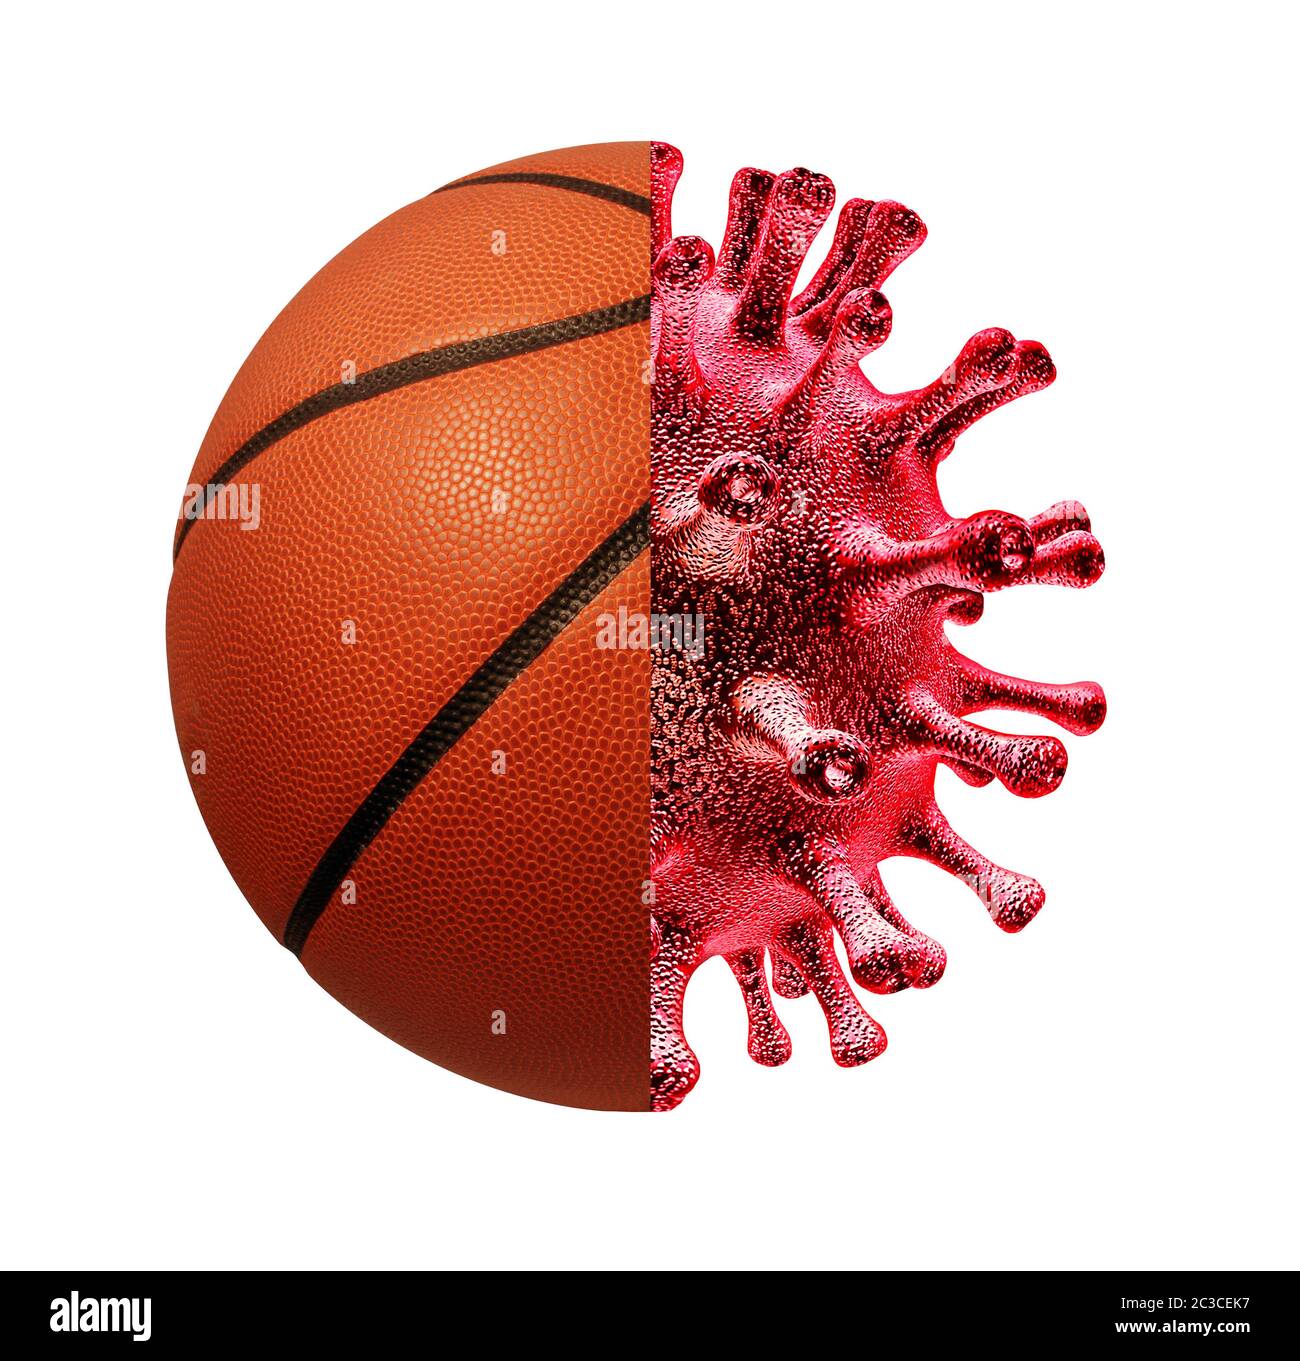 Basketball and coronavirus pandemic or sport cancellation due to covid or influenza virus infection risk with 3D illustration elements. Stock Photo